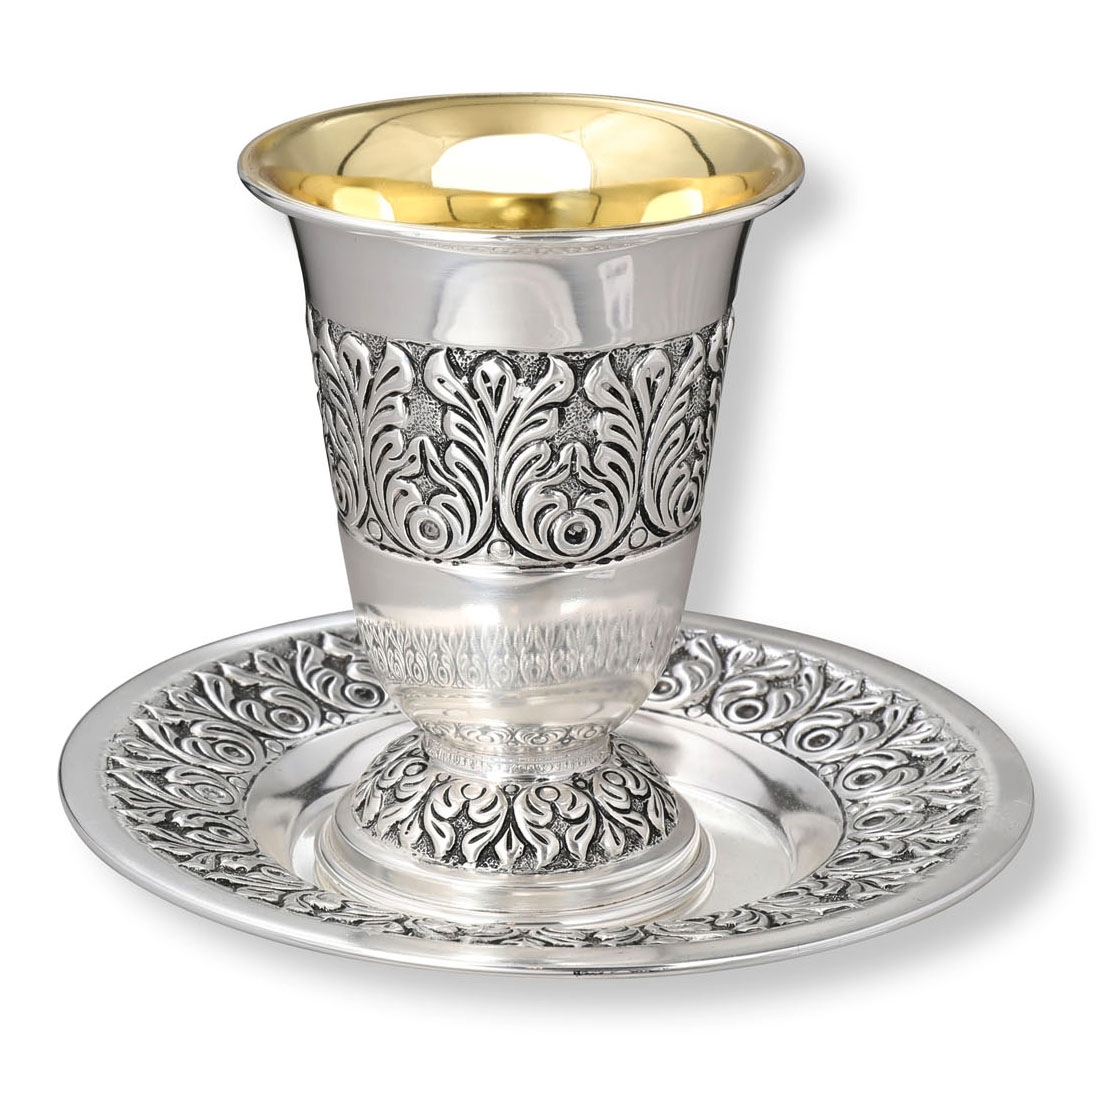 Flames Silver-Plated Kiddush Cup Set - 1